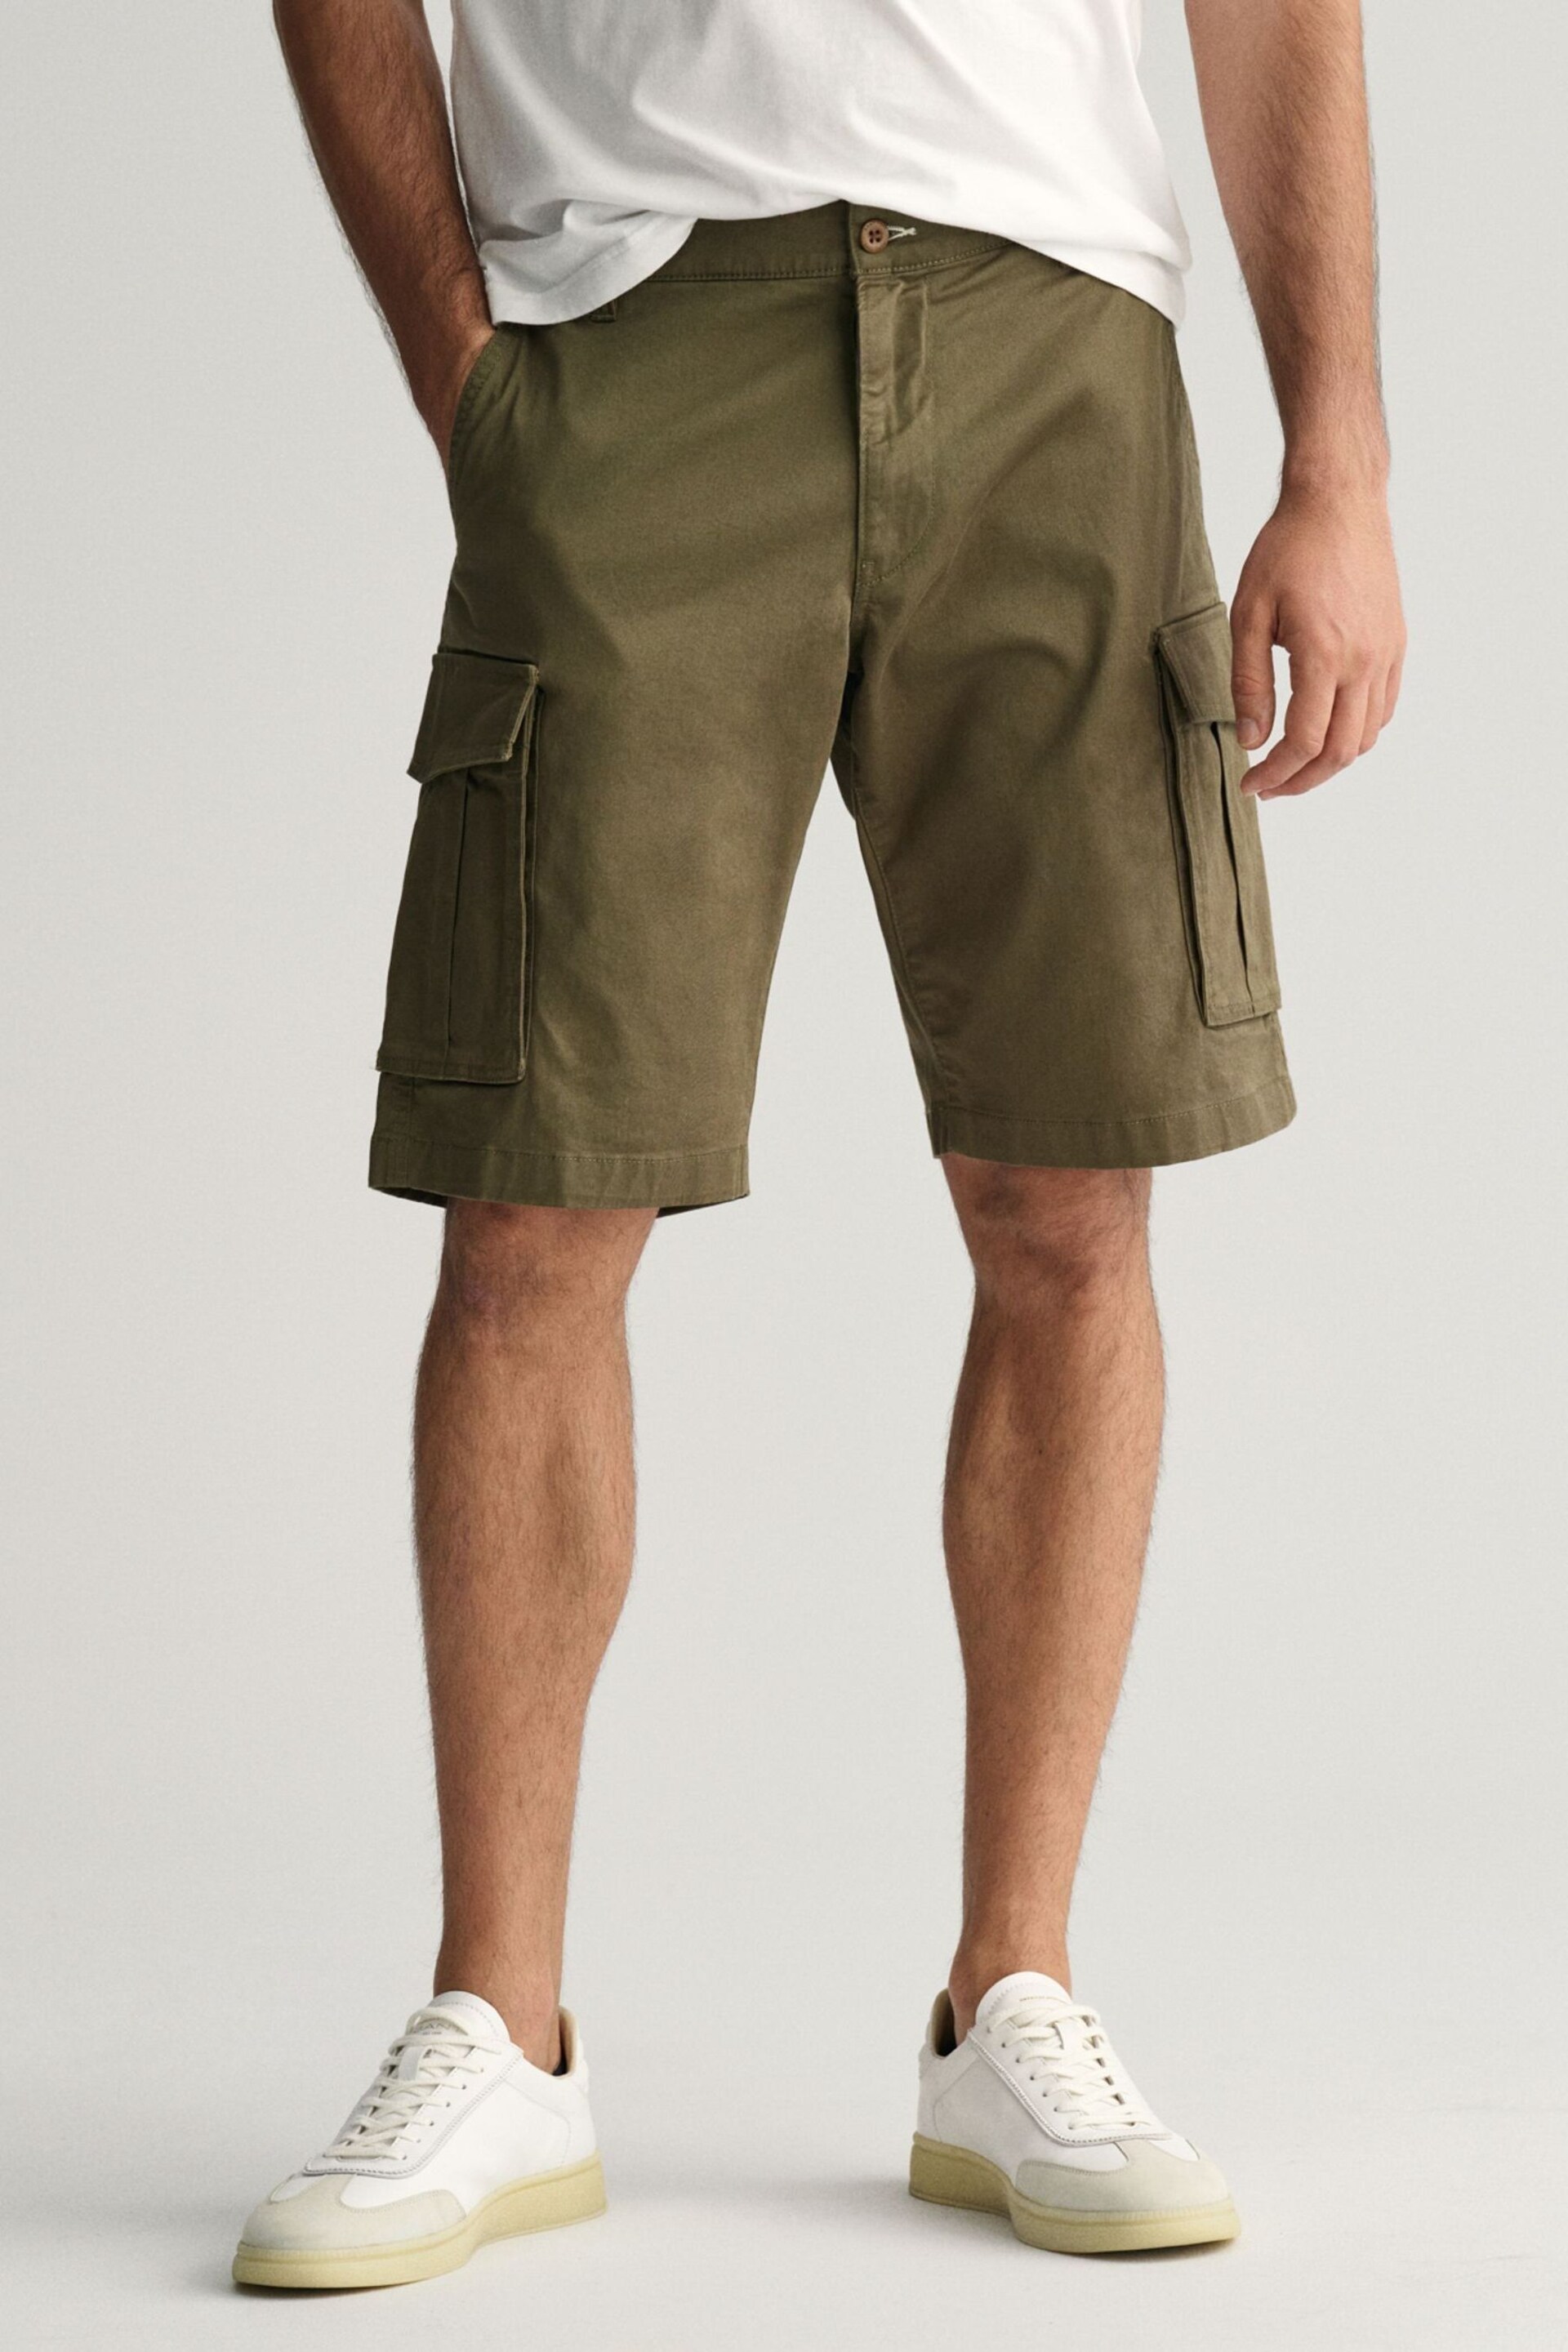 GANT Green Relaxed Twill Cargo Shorts - Image 4 of 9